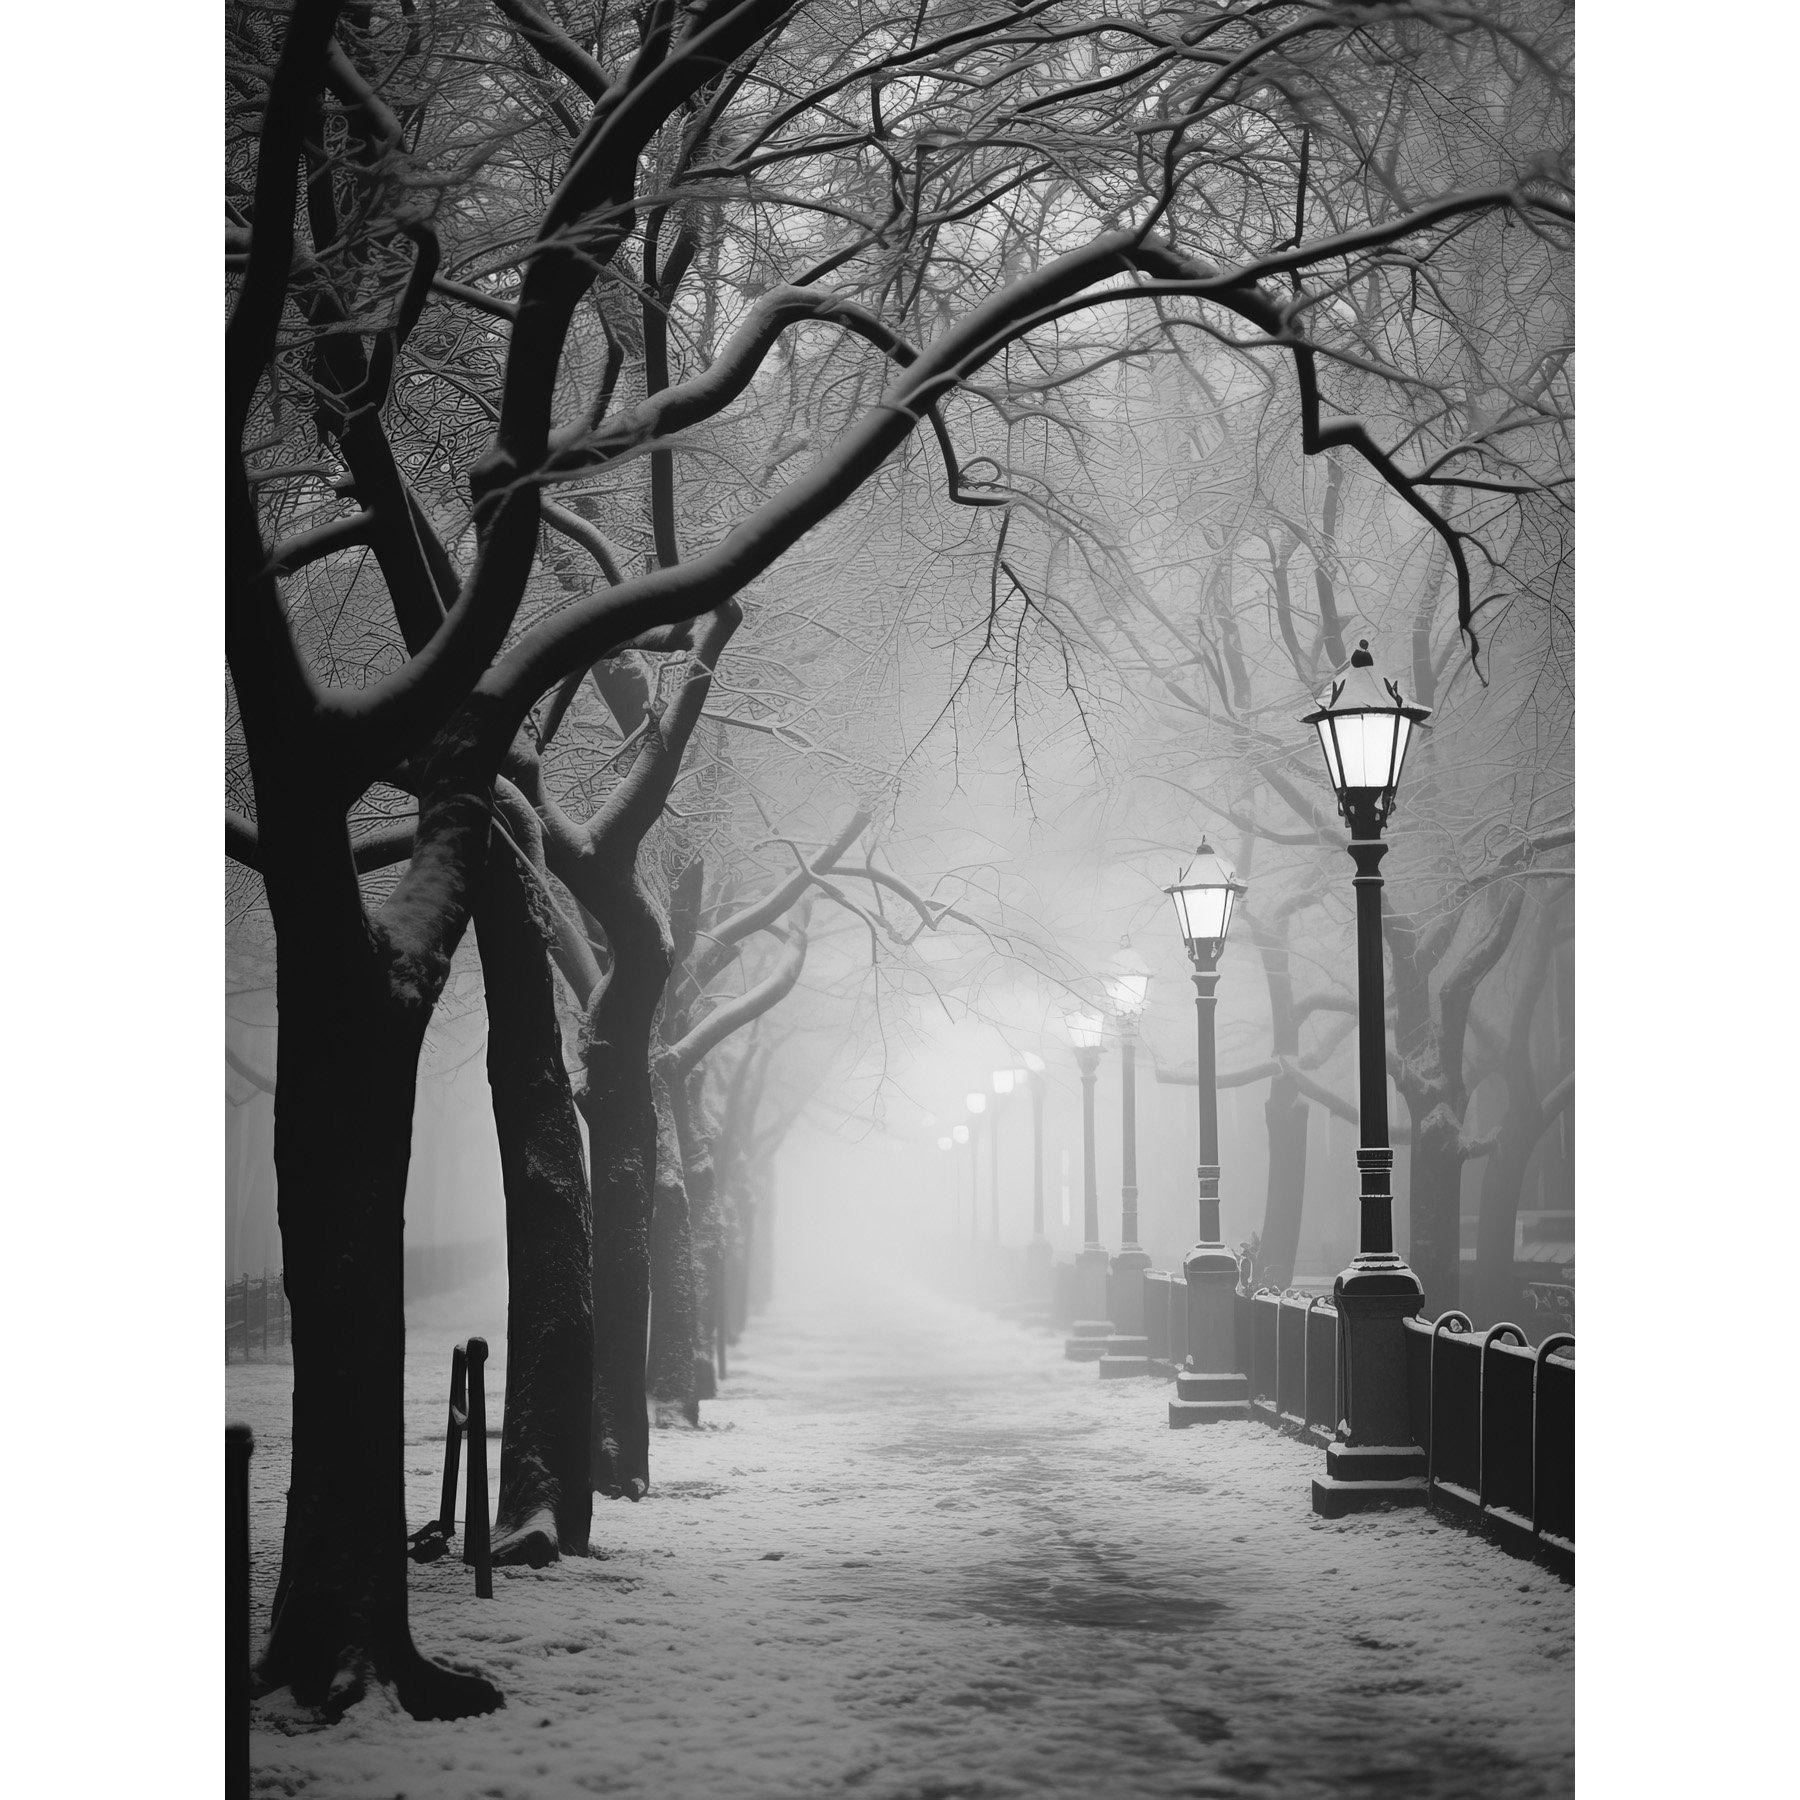 Wall Art Print Snow Covered Street in the Misty Glow of Light Posts Atmospheric Black and White Photograph Winter Scene Poster - image 1